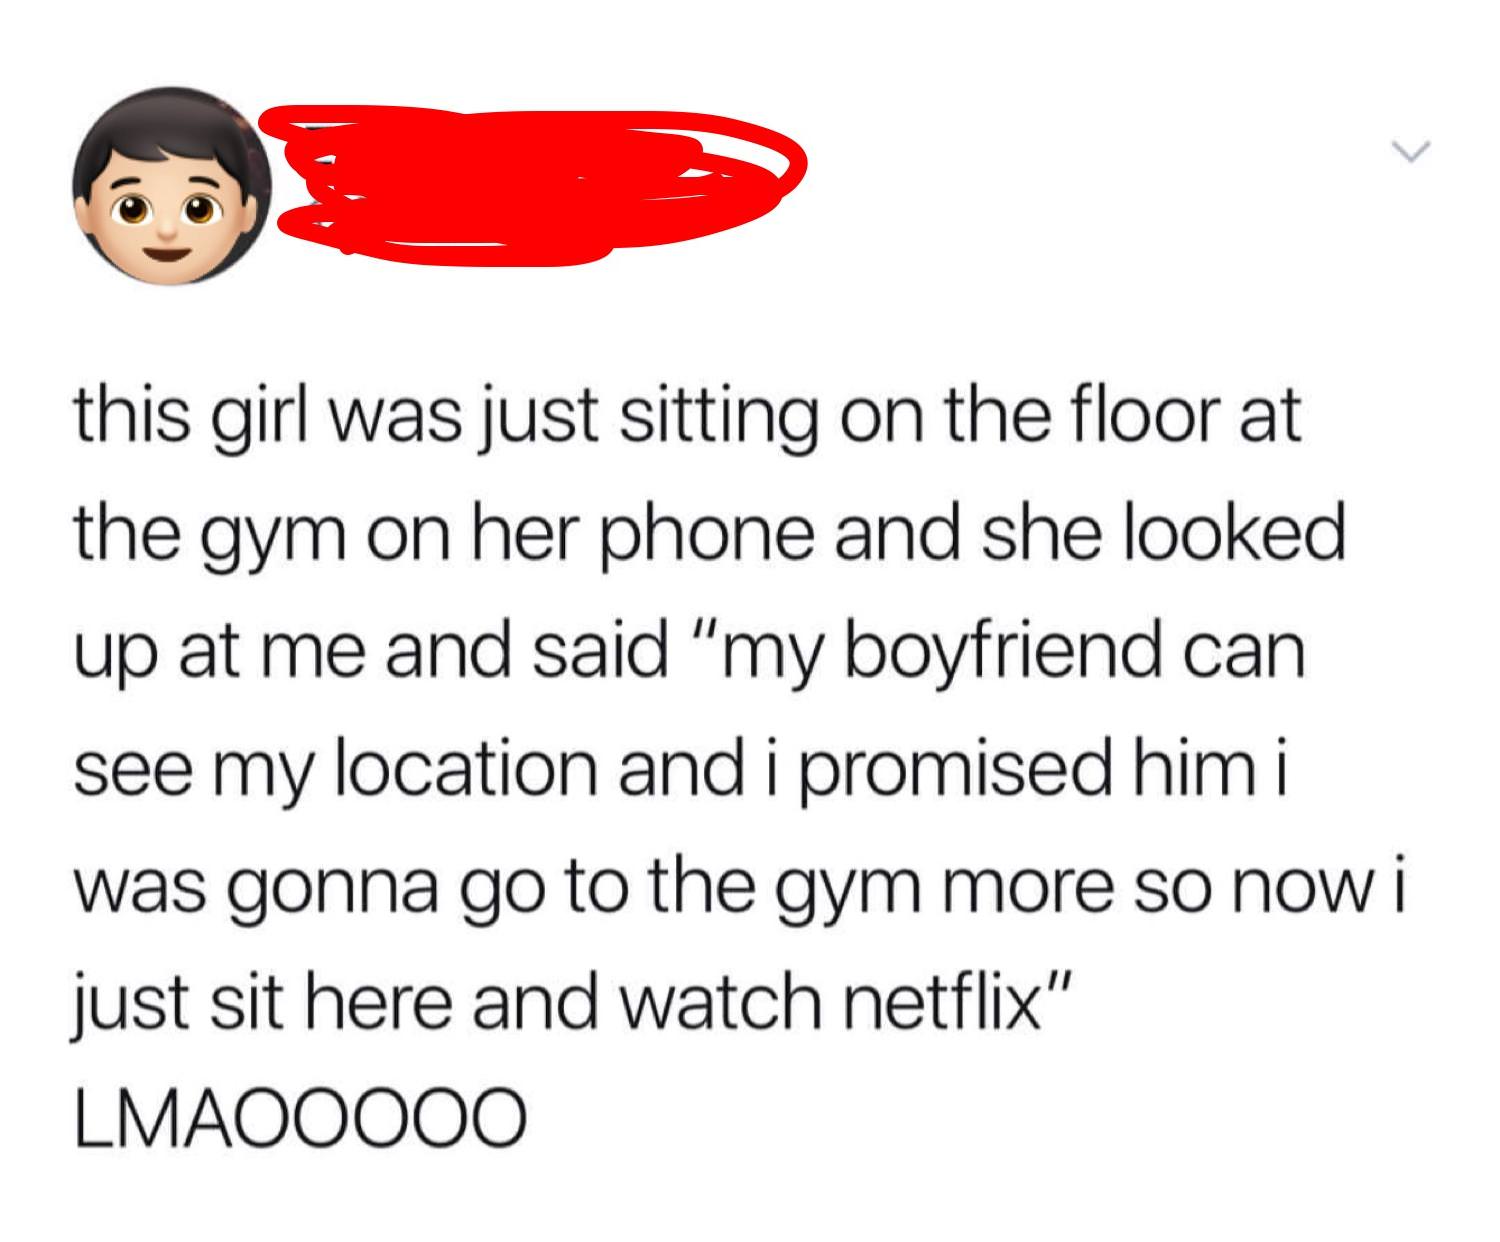 smile - this girl was just sitting on the floor at the gym on her phone and she looked up at me and said "my boyfriend can see my location and i promised him i was gonna go to the gym more so now i just sit here and watch netflix" LMAOO000